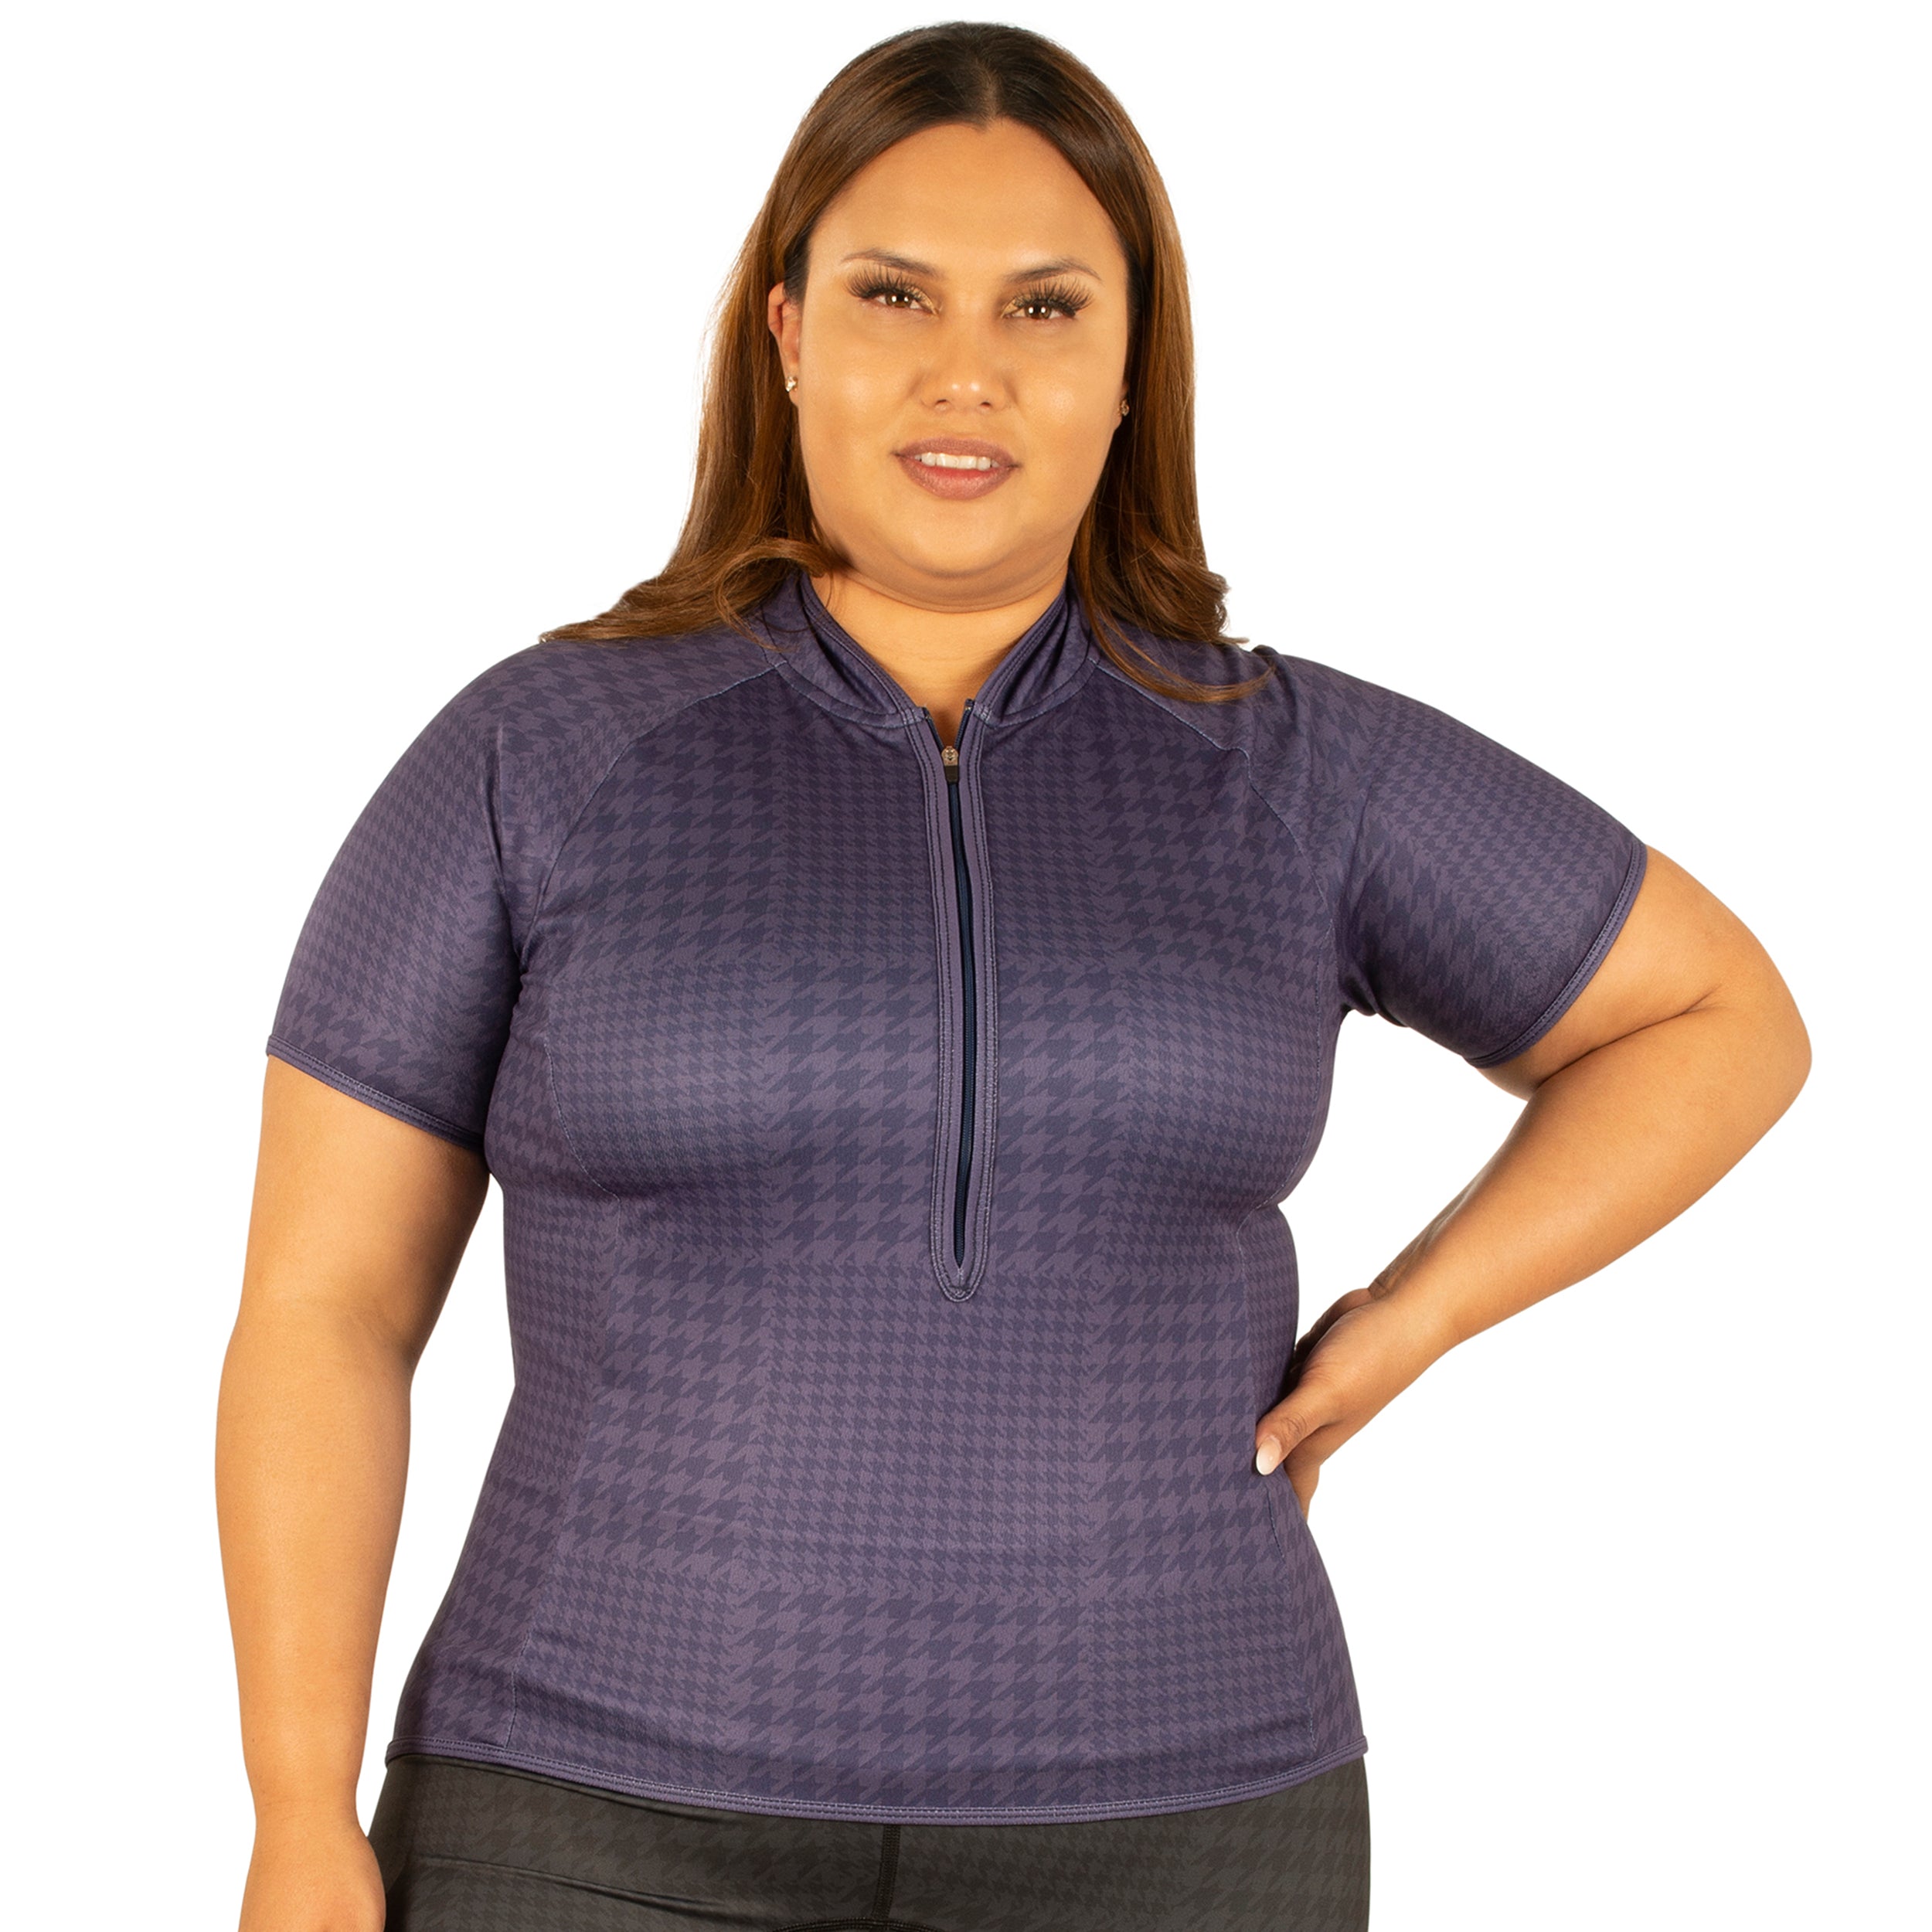 Tonal Houndstooth Bellissima Jersey PLUS SIZE